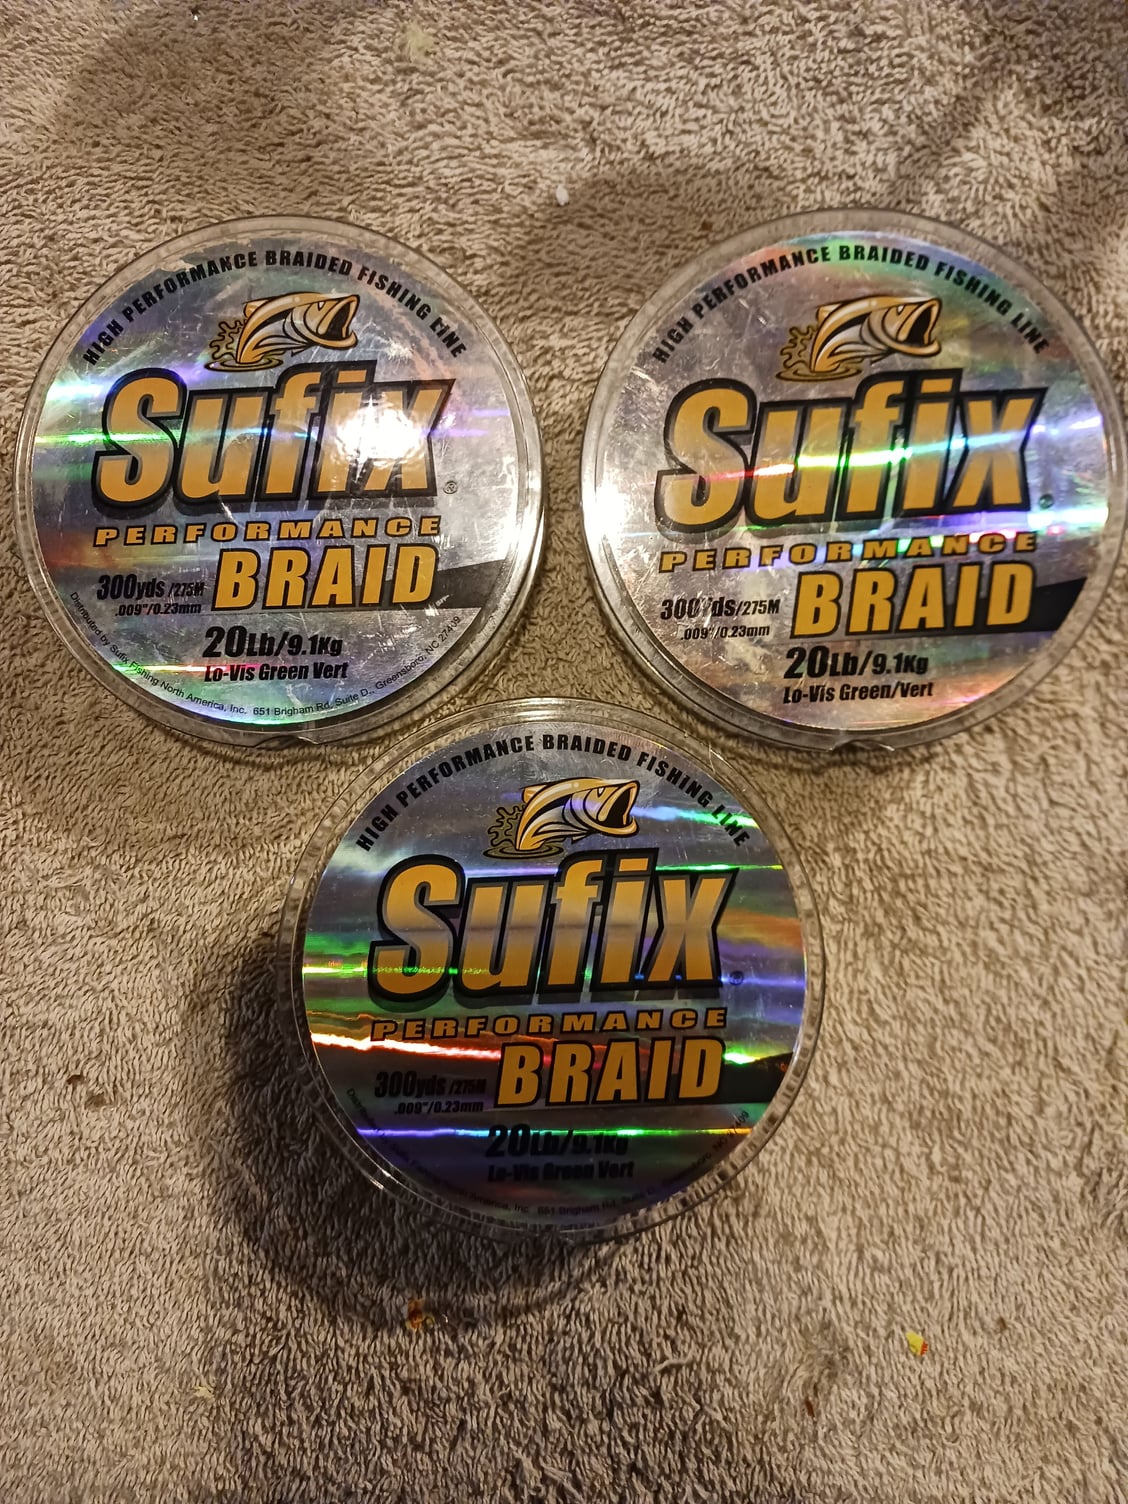 Suffix 20lb braid - The Hull Truth - Boating and Fishing Forum